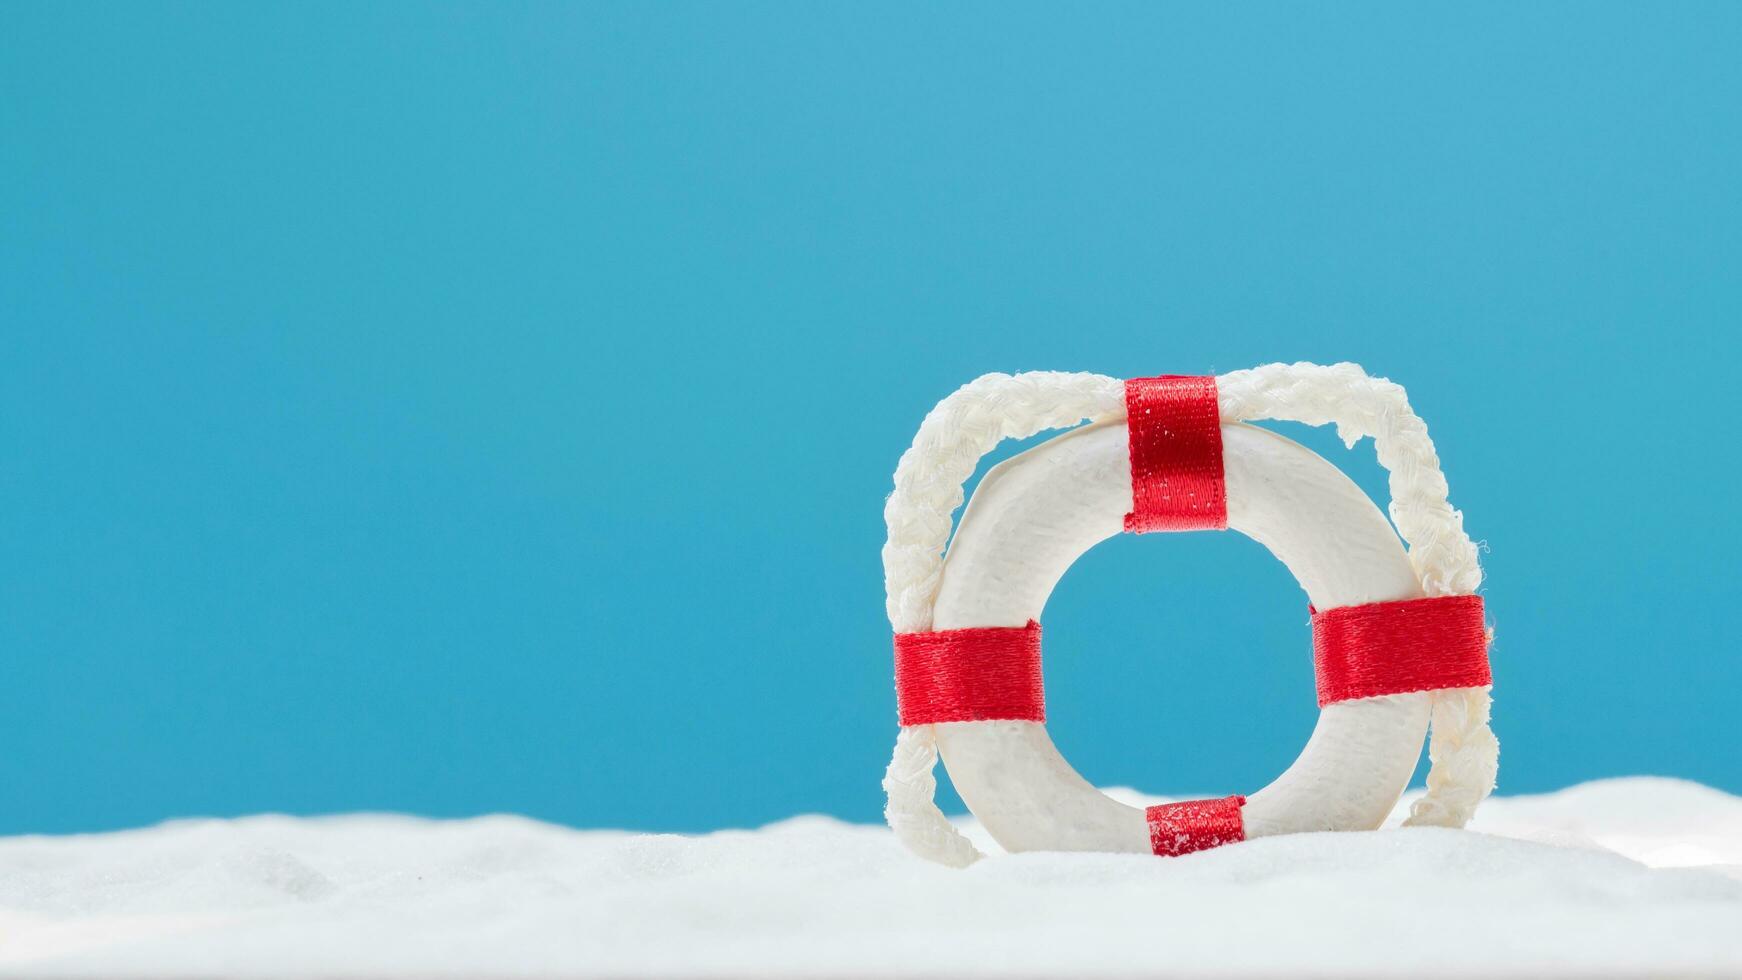 a life preserver  on the snow photo